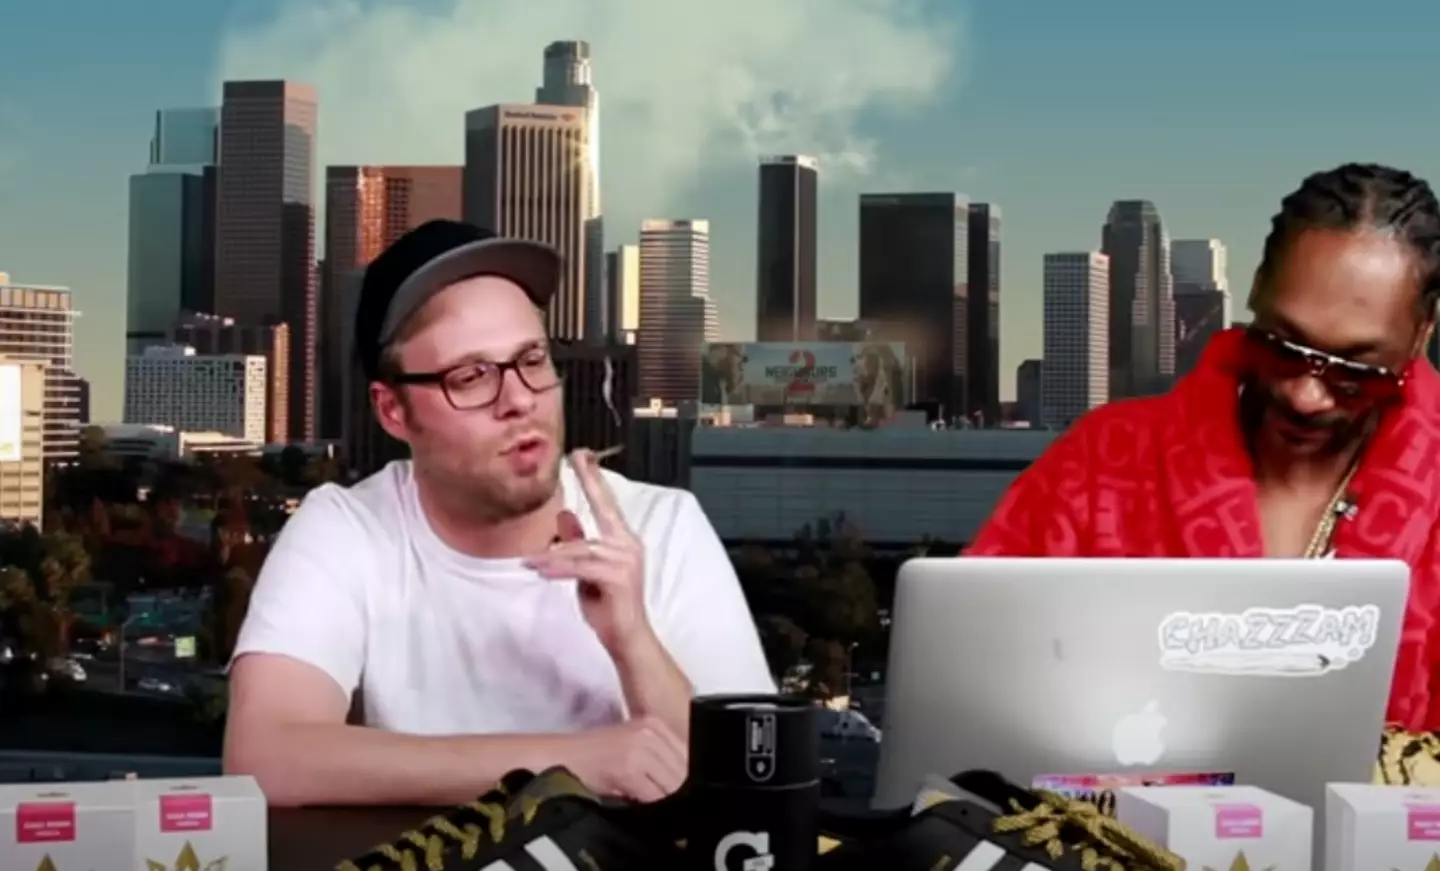 Snoop Dogg and Seth Rogen have shared why they don't like edibles.